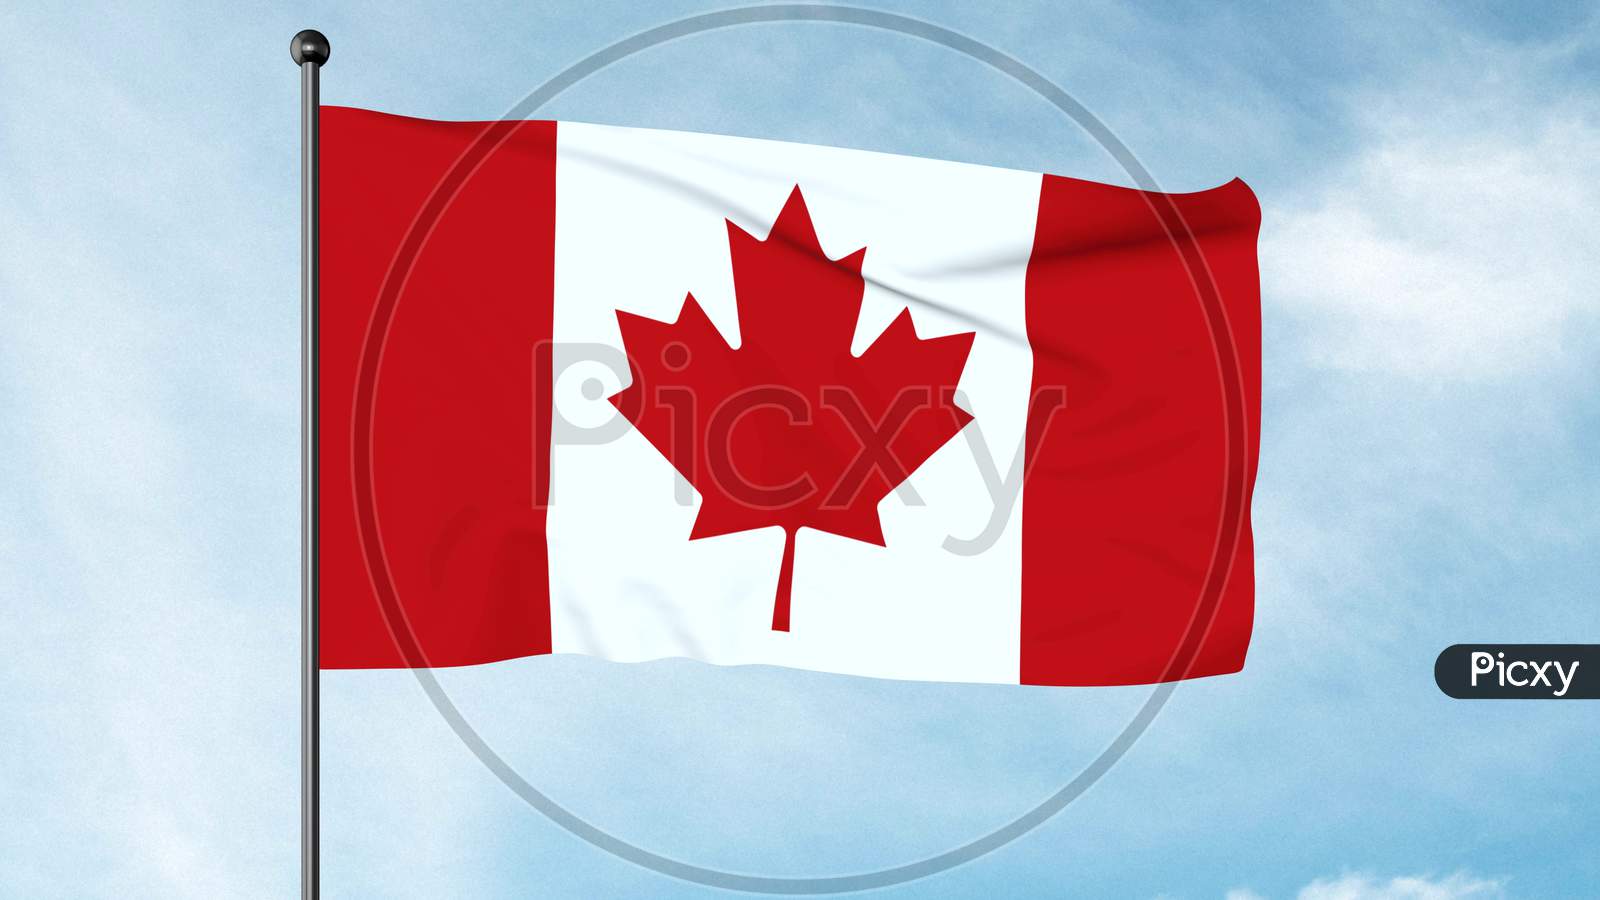 3D Illustration The National Flag Of Canada, The Canadian Flag, The Maple Leaf Or L'Unifolié, Consists Of A Red Field With A White Square At Its Centre In The Ratio Of 1:2:1, In The Middle Of Which Is Featured A Stylized